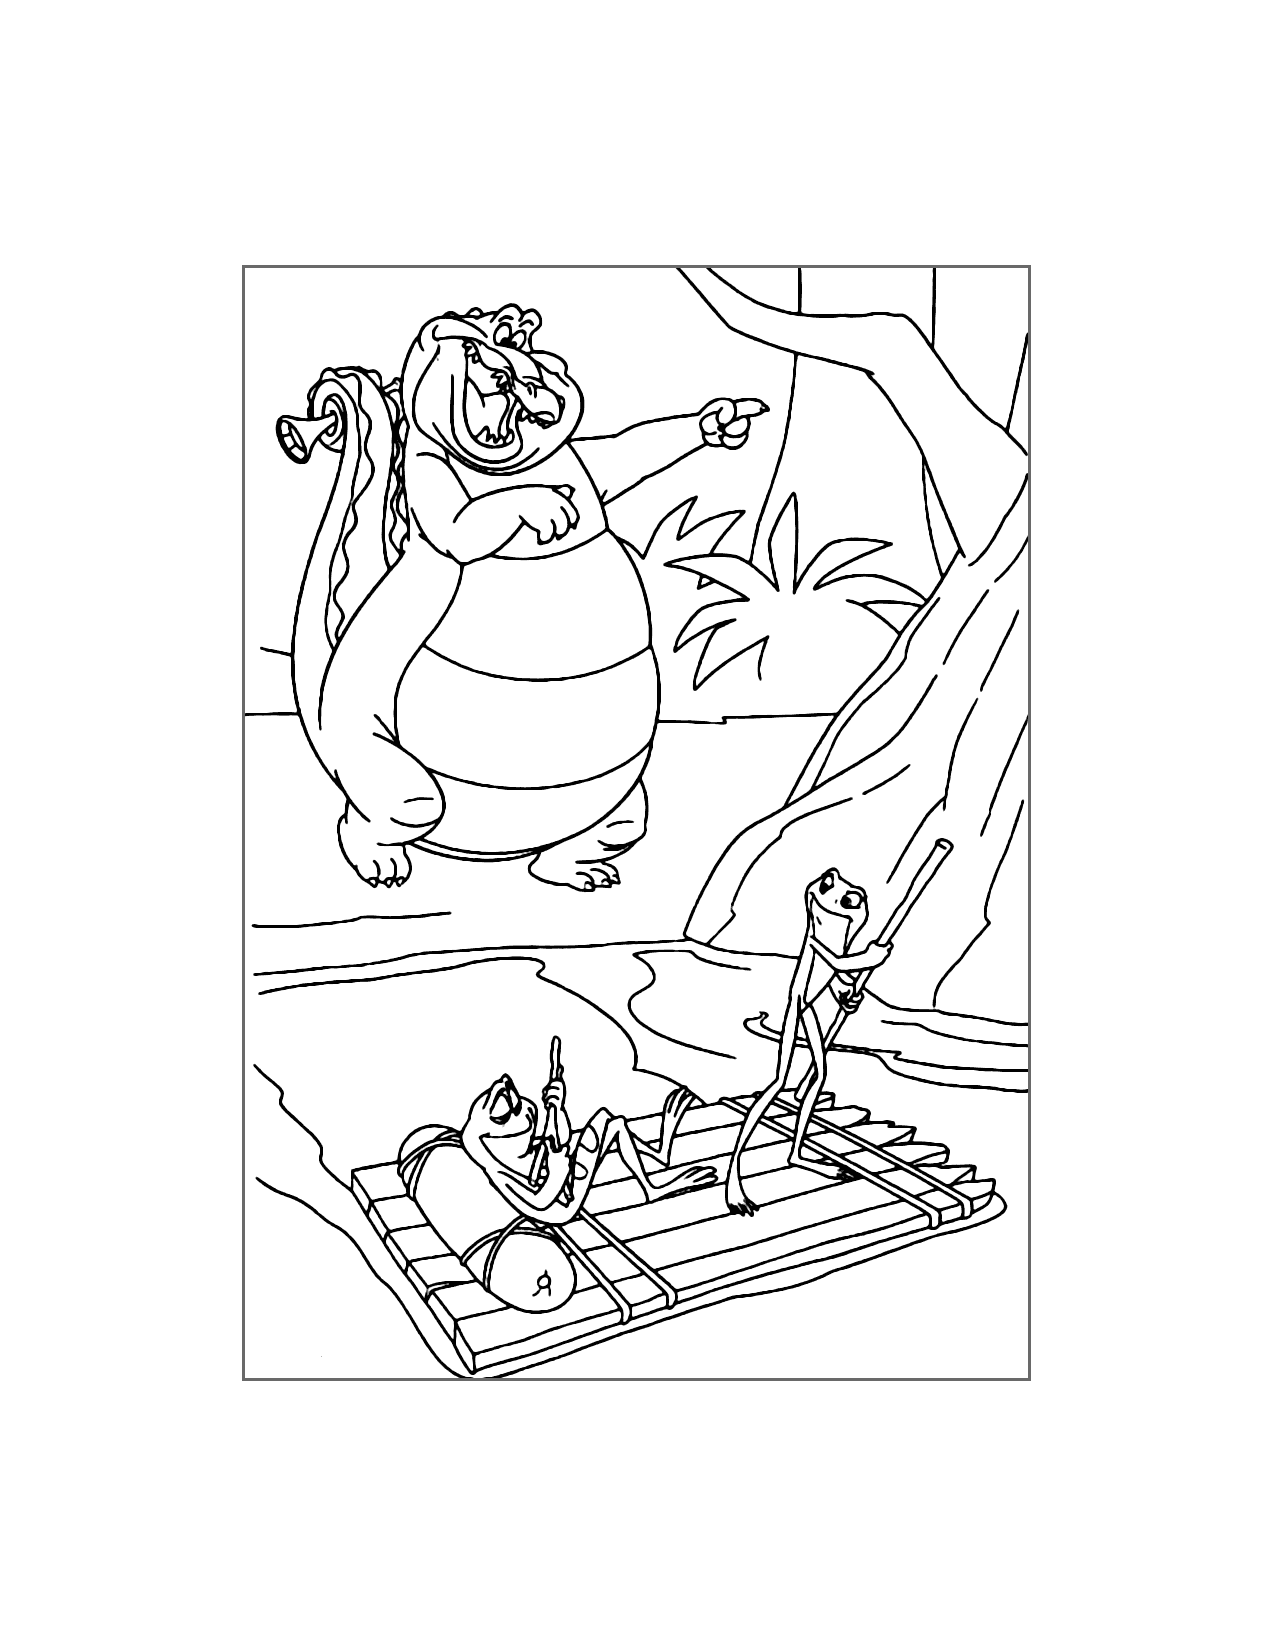 Tiana And Naveen On A Raft Coloring Page